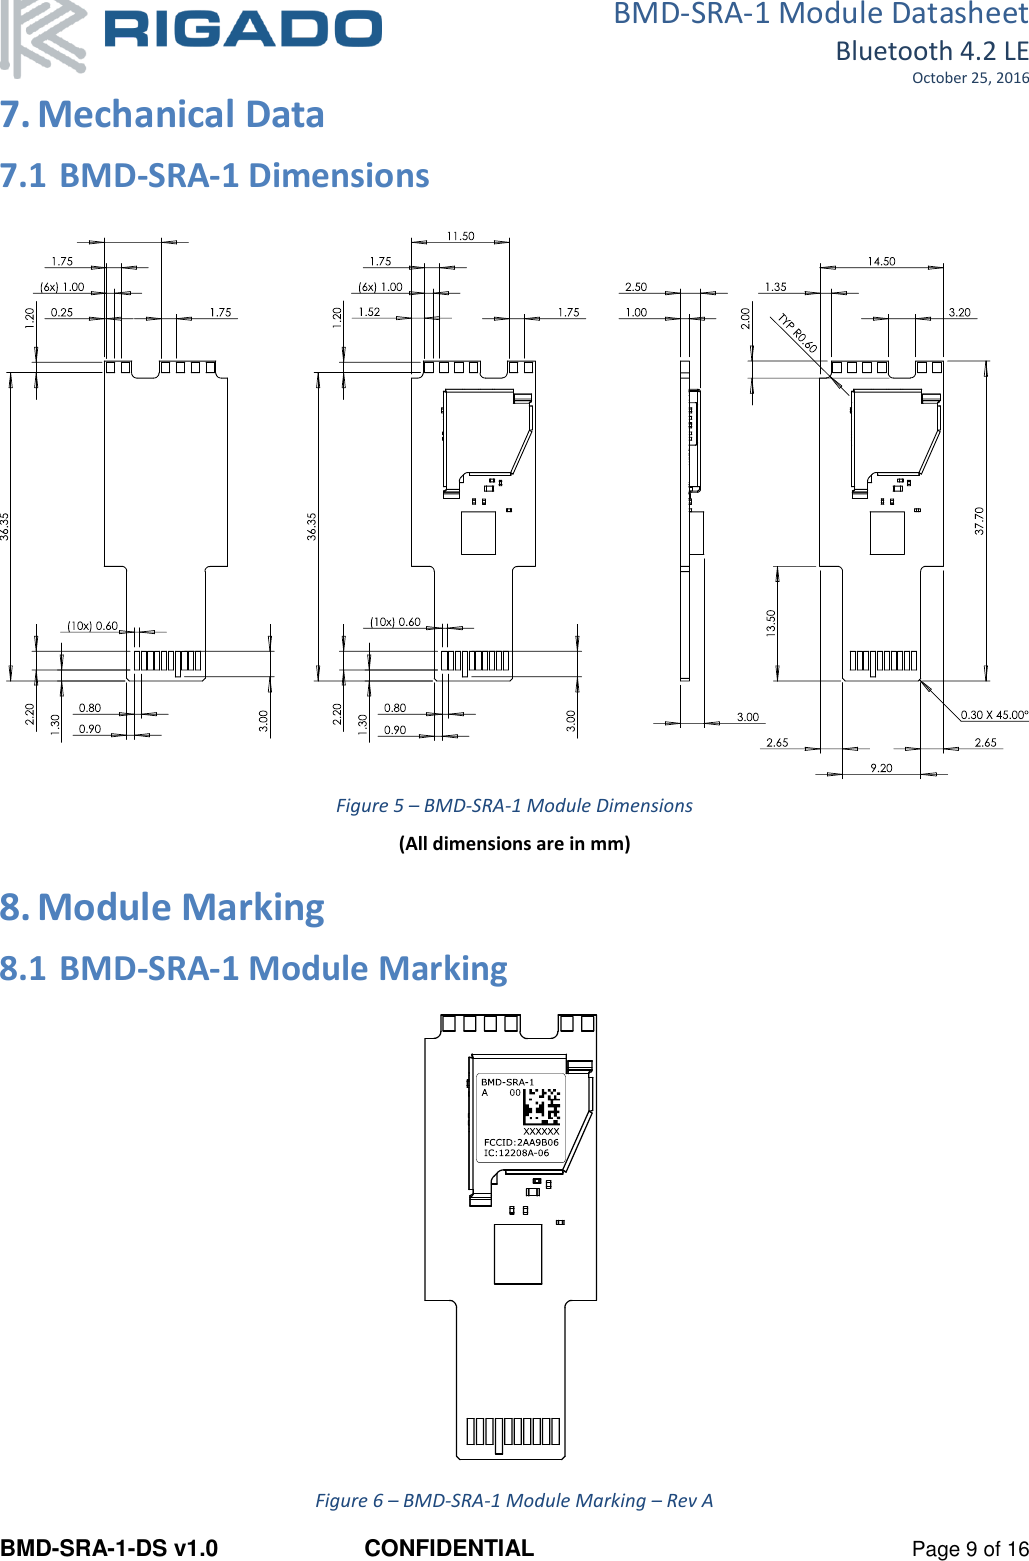 BMD-SRA-1 Module Datasheet Bluetooth 4.2 LE October 25, 2016 BMD-SRA-1-DS v1.0  CONFIDENTIAL  Page 9 of 16 7. Mechanical Data 7.1 BMD-SRA-1 Dimensions    Figure 5 – BMD-SRA-1 Module Dimensions (All dimensions are in mm) 8. Module Marking 8.1 BMD-SRA-1 Module Marking  Figure 6 – BMD-SRA-1 Module Marking – Rev A  